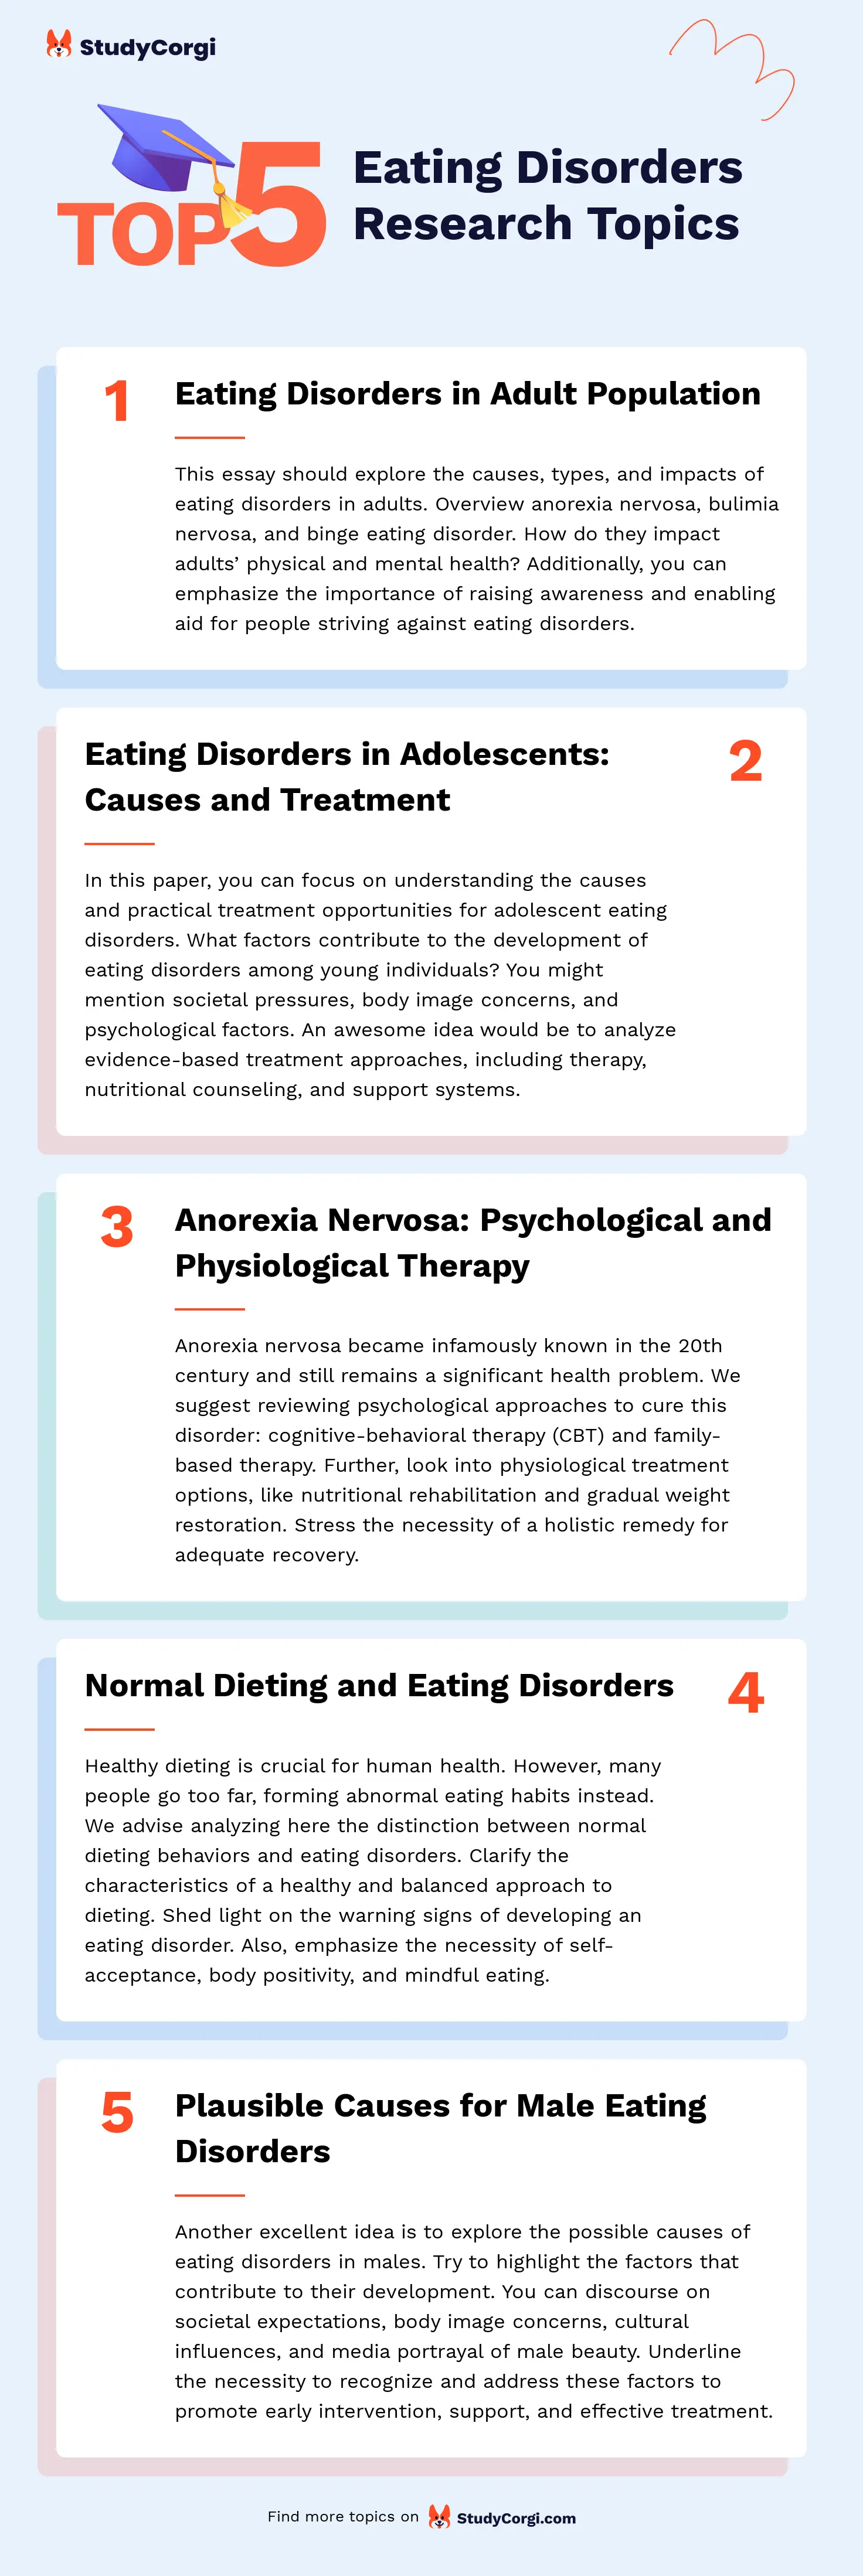 TOP-5 Eating Disorders Research Topics